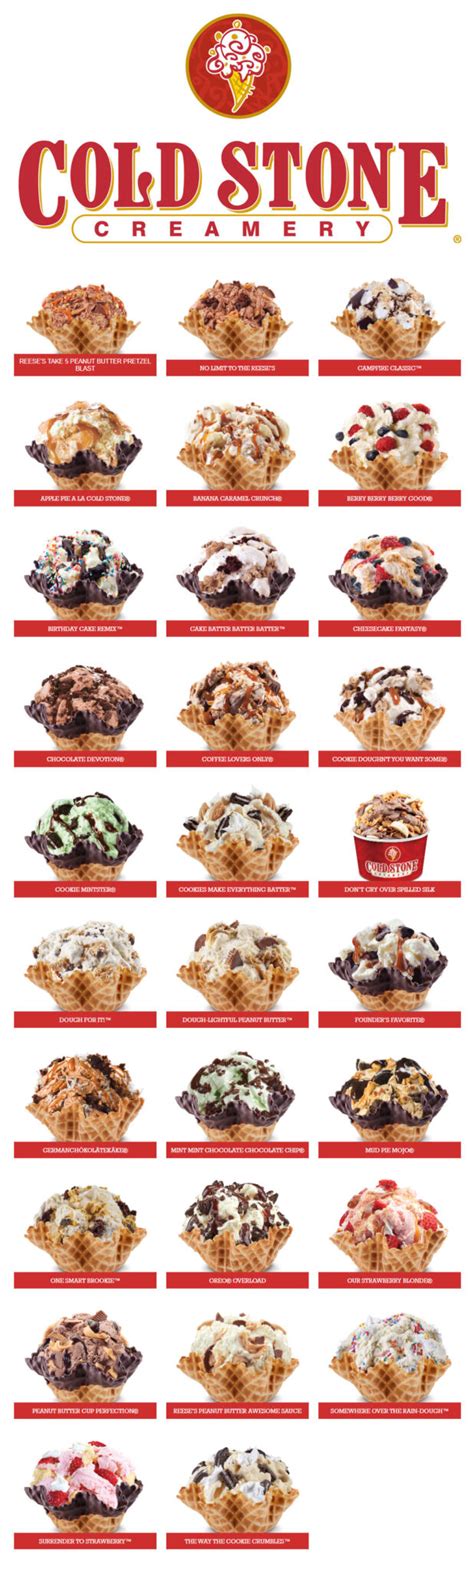 Cold Stone Creamery Fayetteville Menu And Reviews Nwa Food